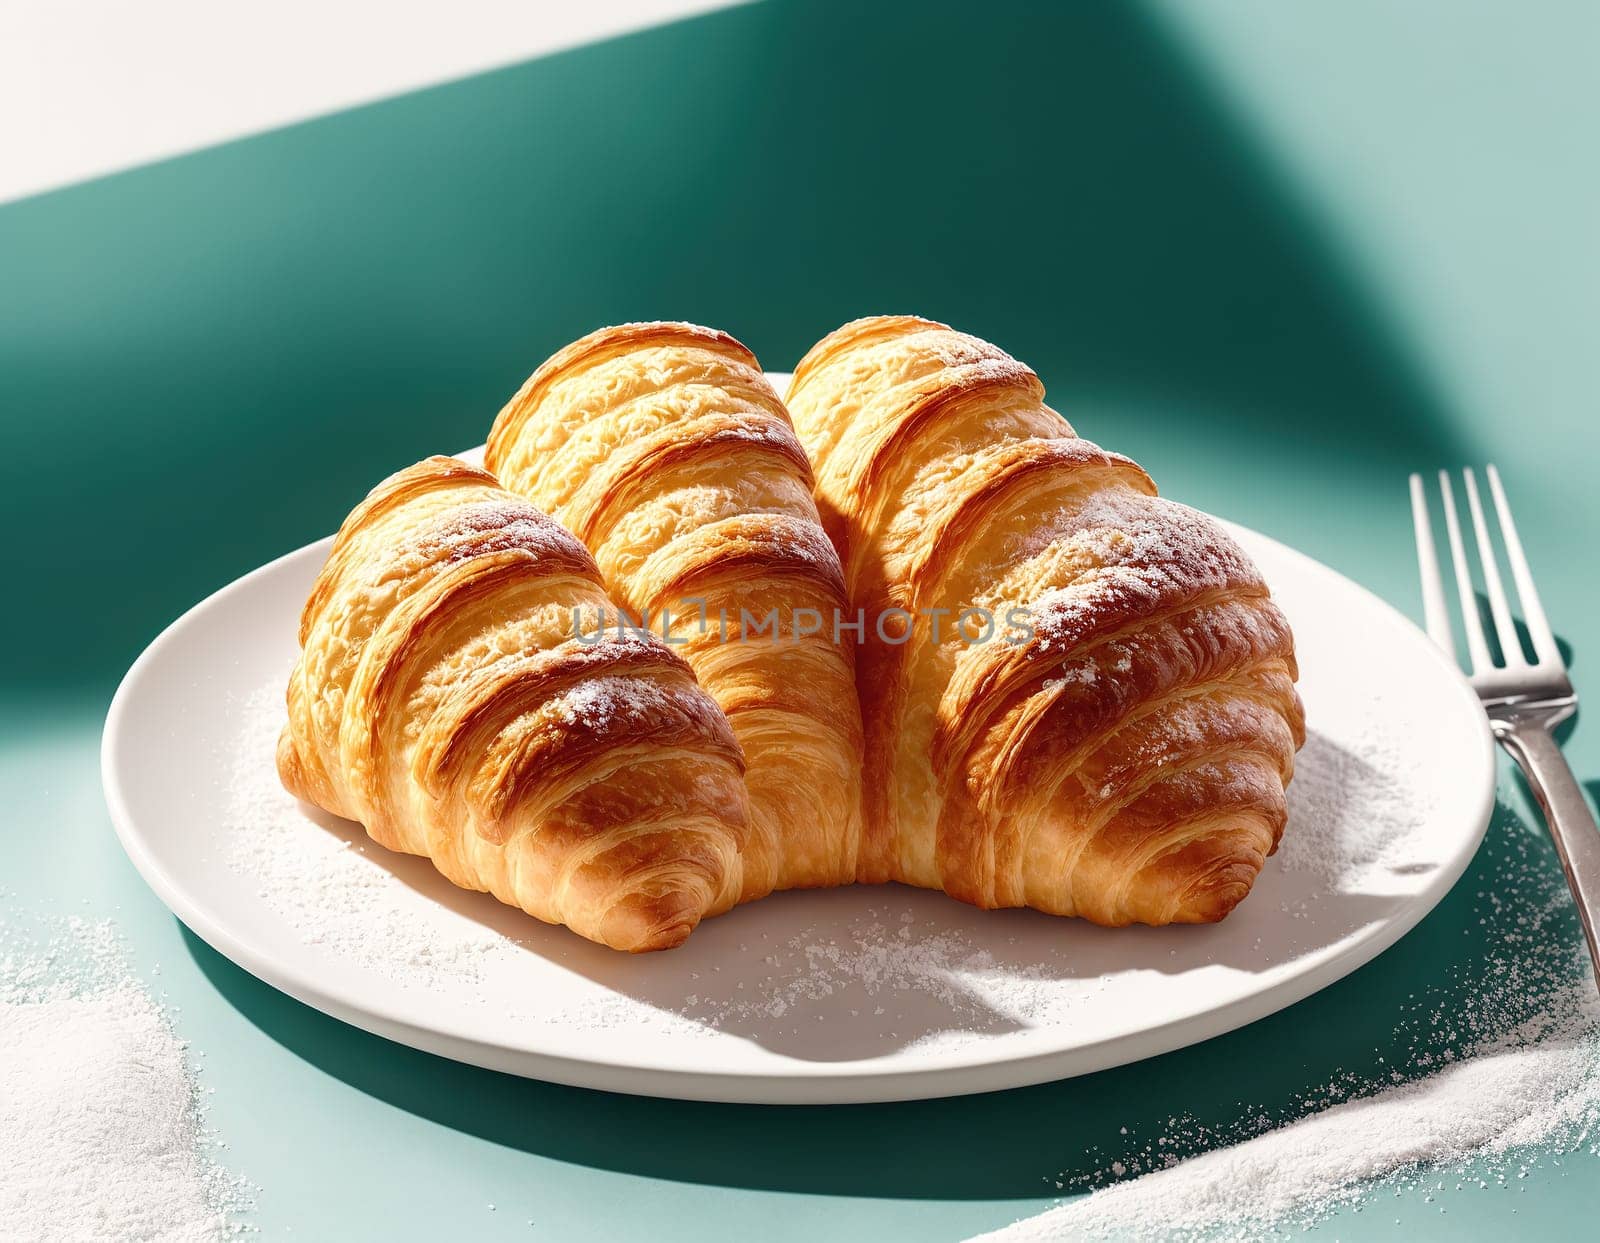 A plate of croissants on a table. by creart